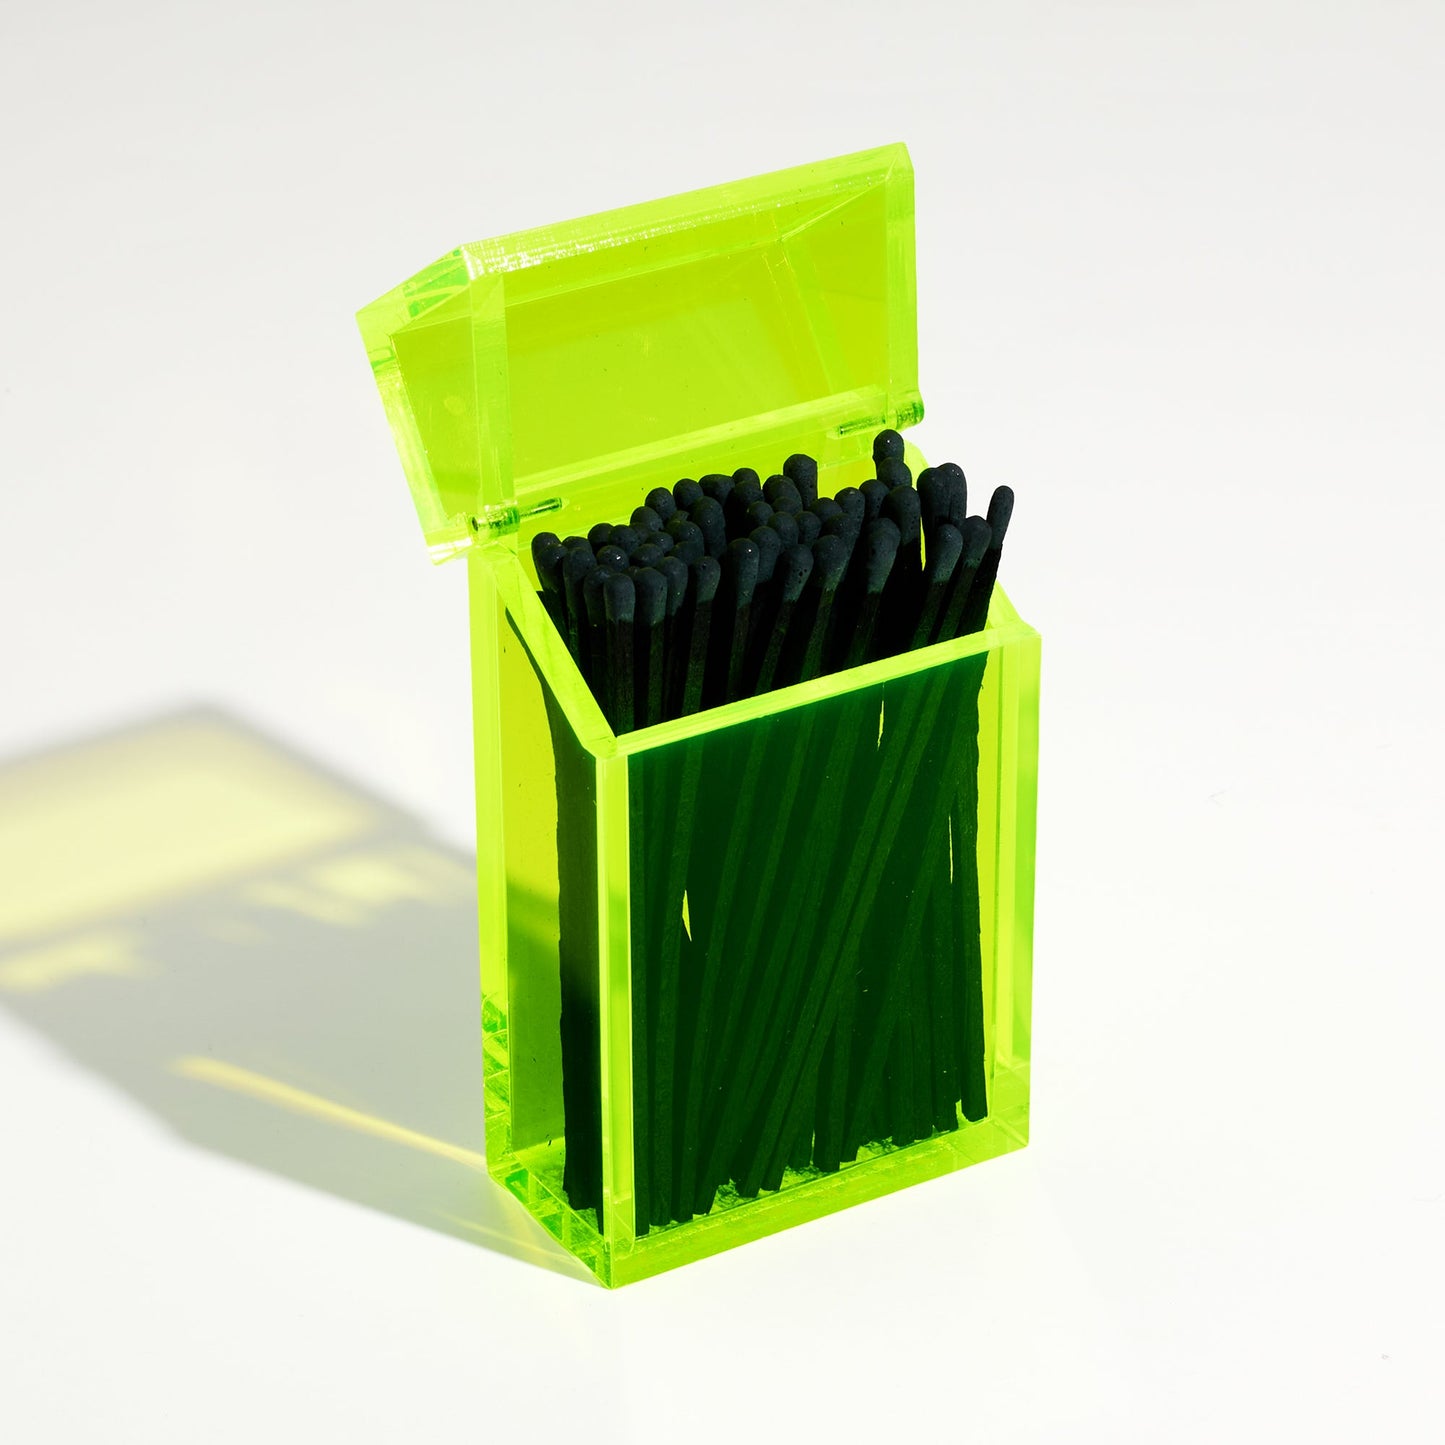 Opened Opened Match holder shaped like a Cigarette Case. Made with neon green acrylic. Case holds Black matches in it.